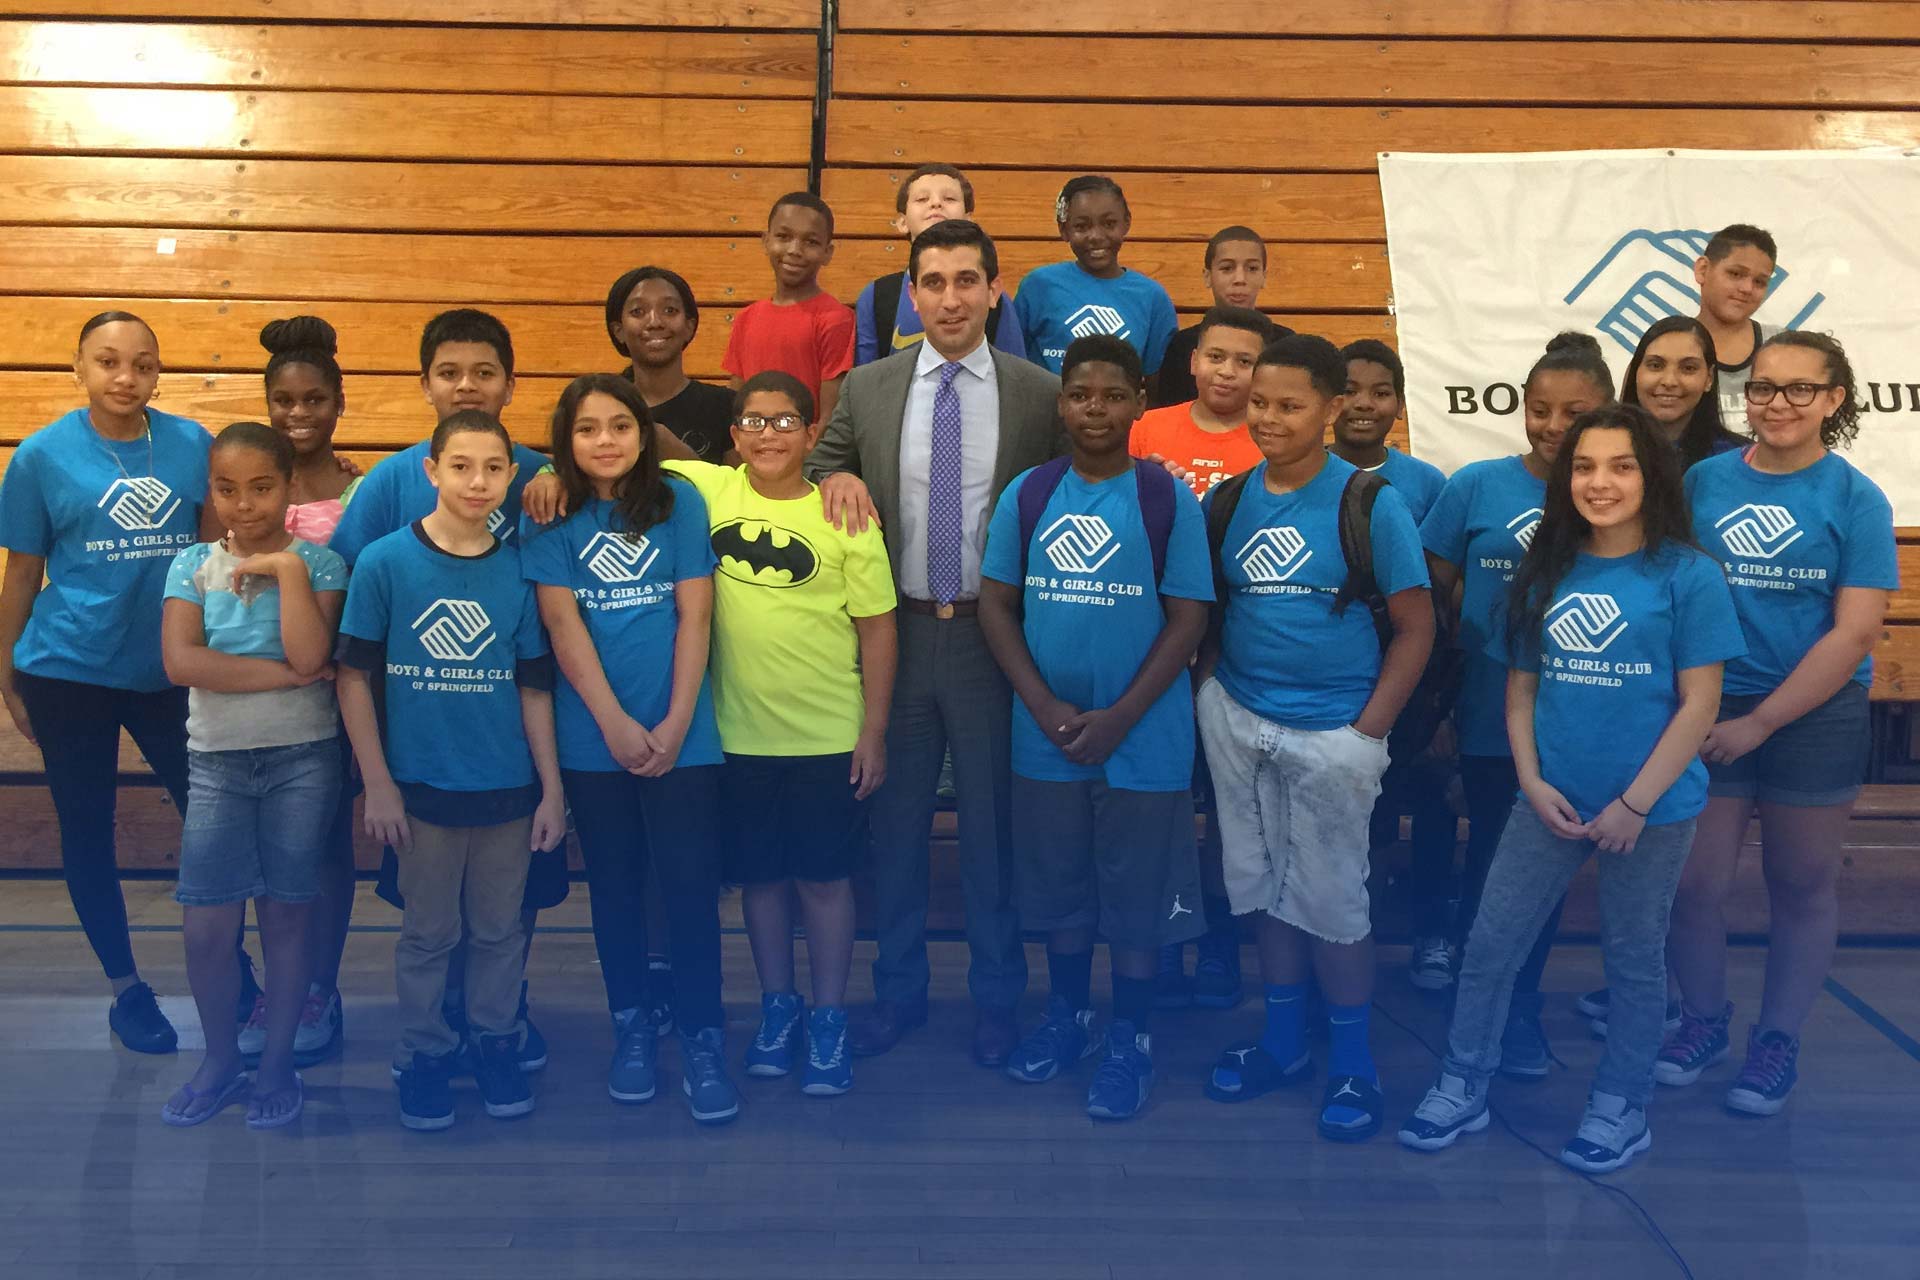 Hampden District Attorney Anthony Gulluni poses for a photo with a group of kids from the boys and girls club.